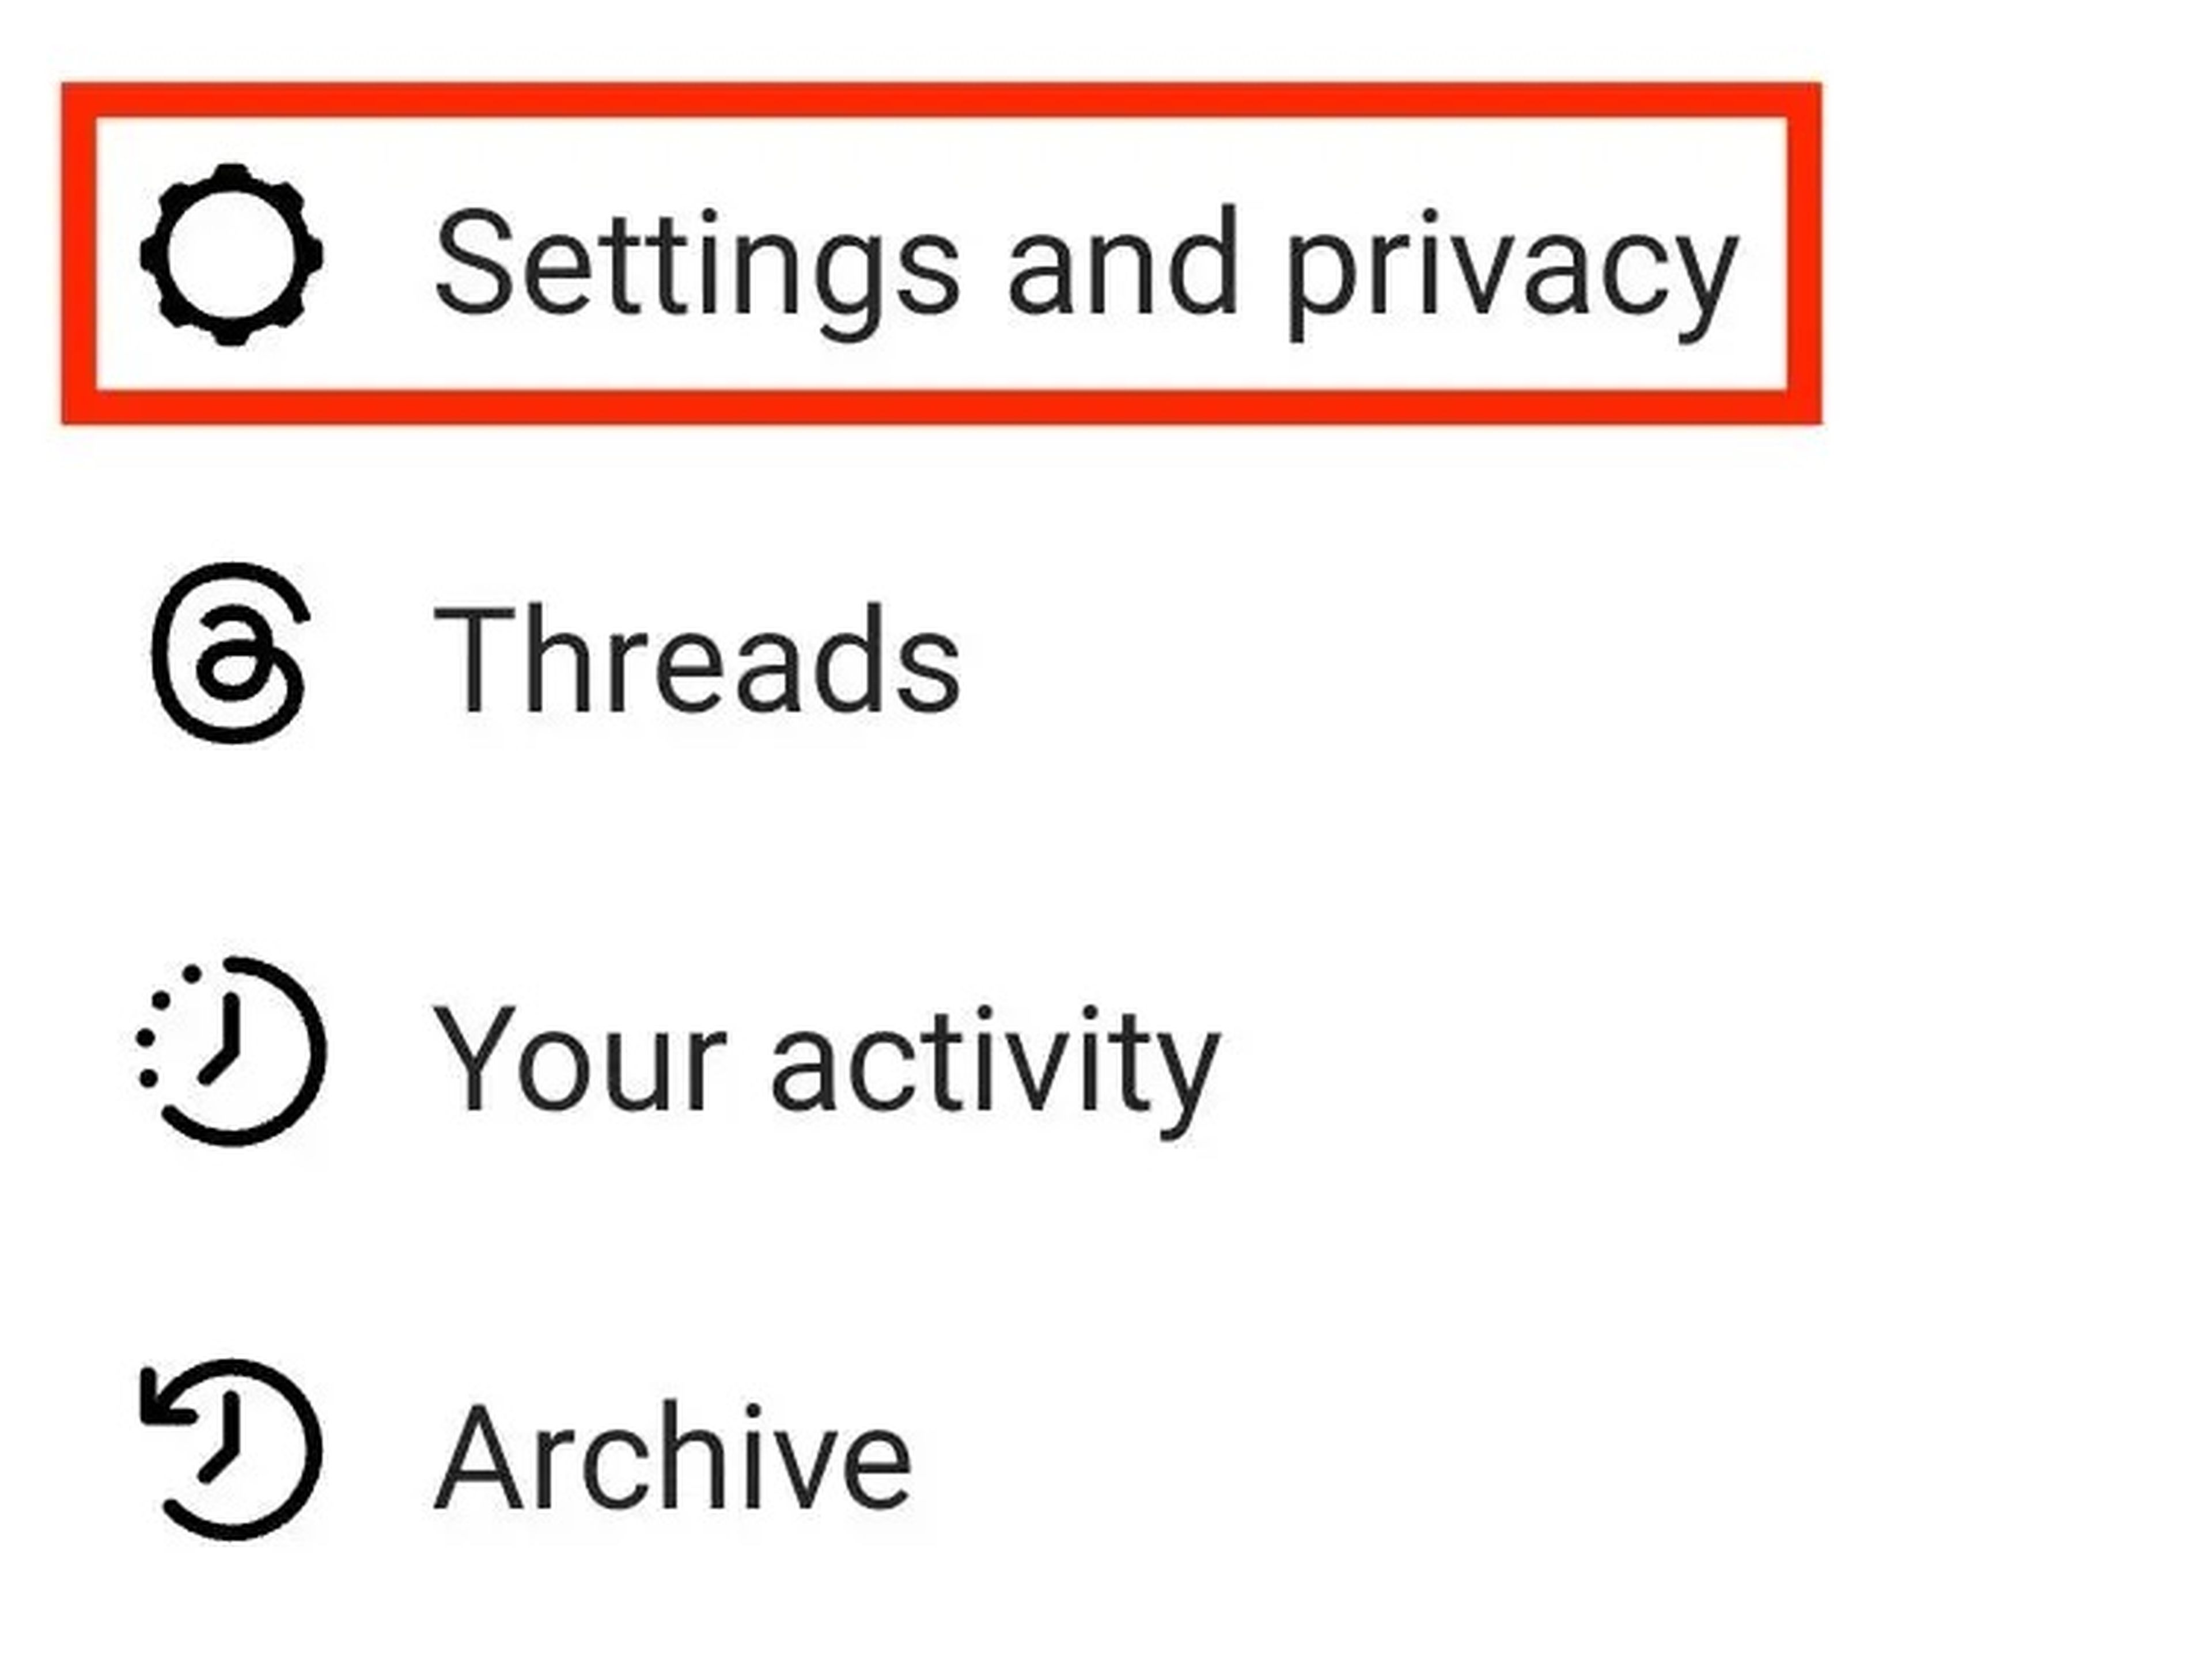 A screenshot of the Instagram settings page